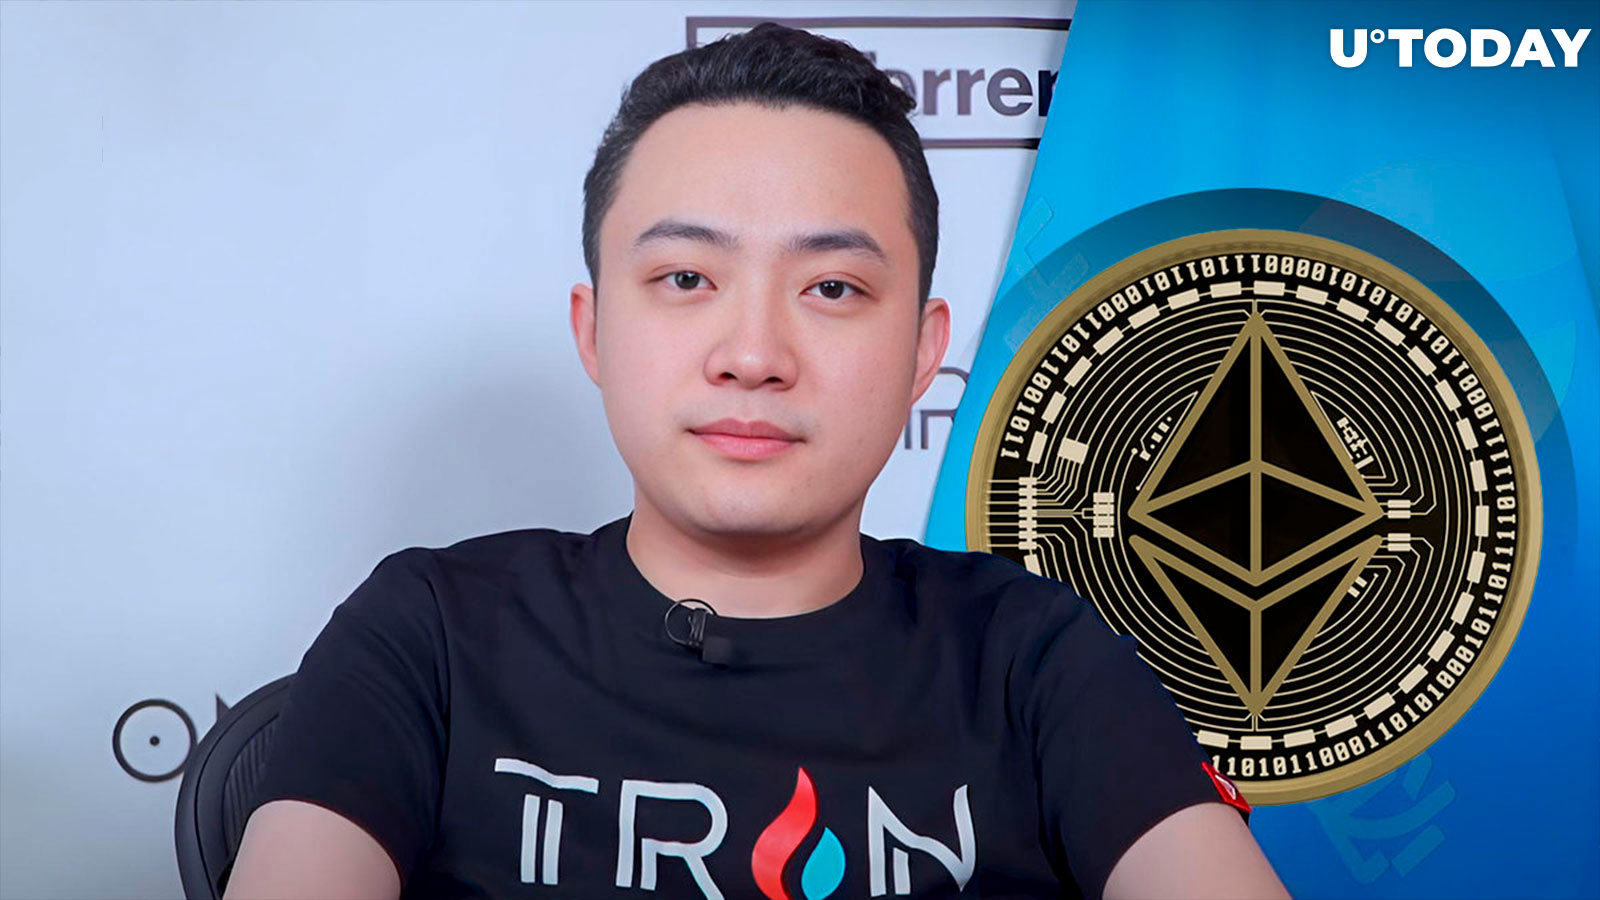 Nearly $500 Million In Ethereum Transferred to Justin Sun-Linked Wallet